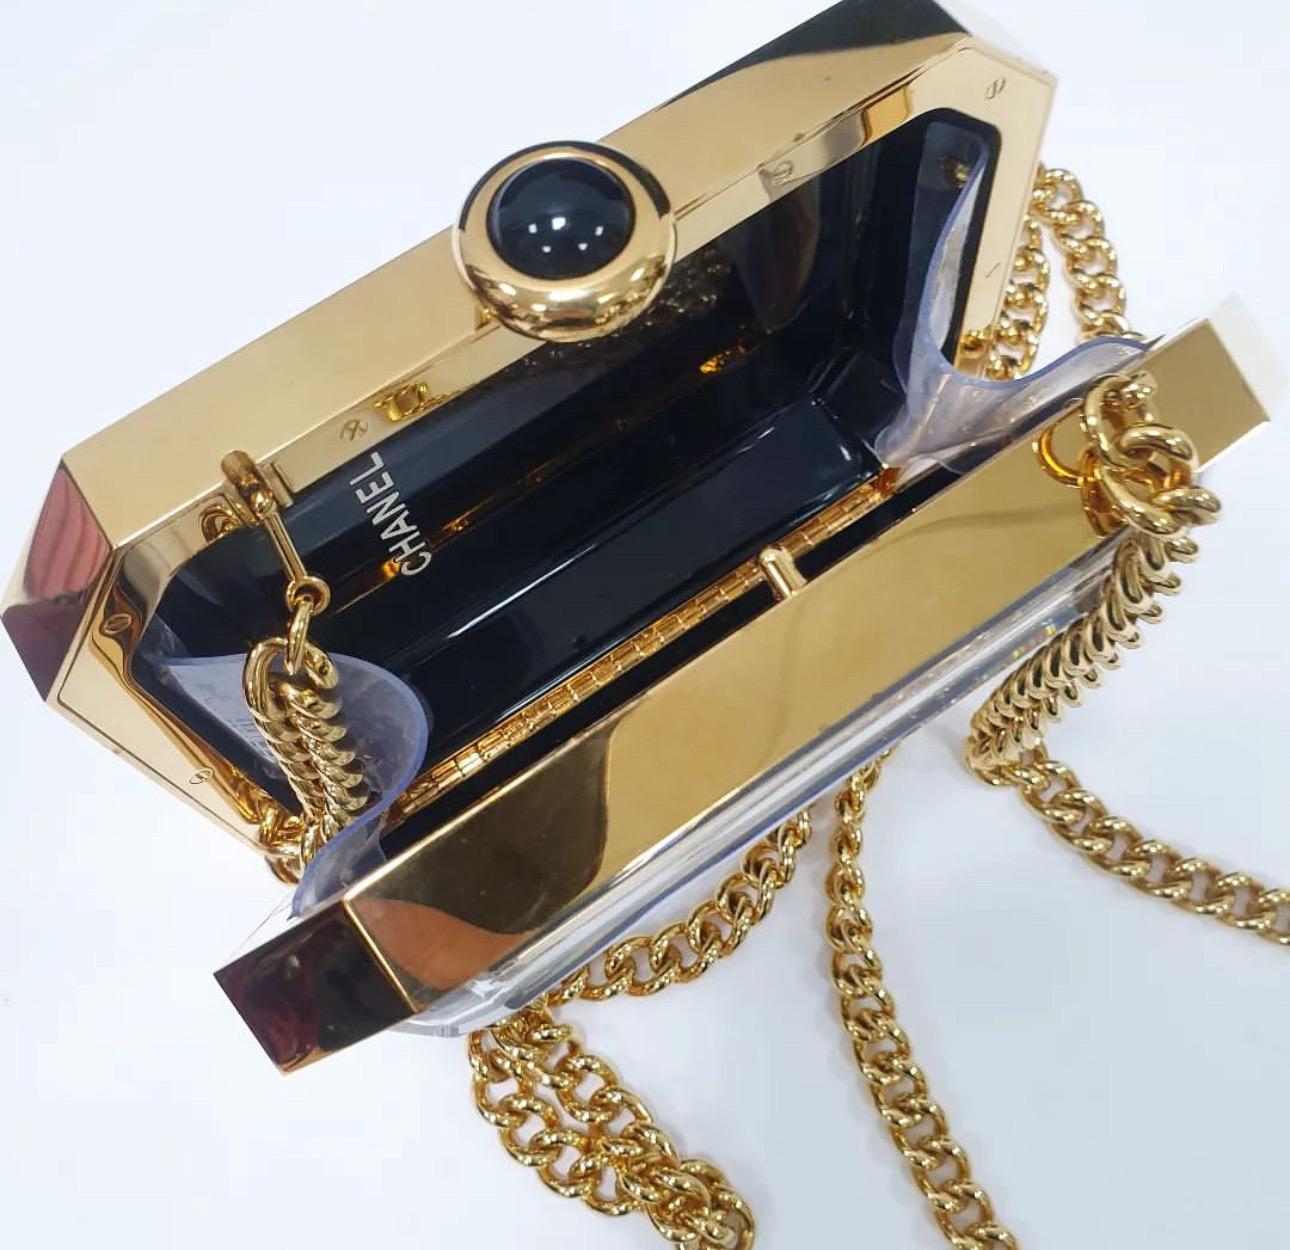 Every creation of Chanel maintains the legacy of the brand with its brilliant craftsmanship and artistic designs. From the brand's range of the most exclusive clutch designs comes this Premiere minaudiere clutch made of plexiglass and gold-tone